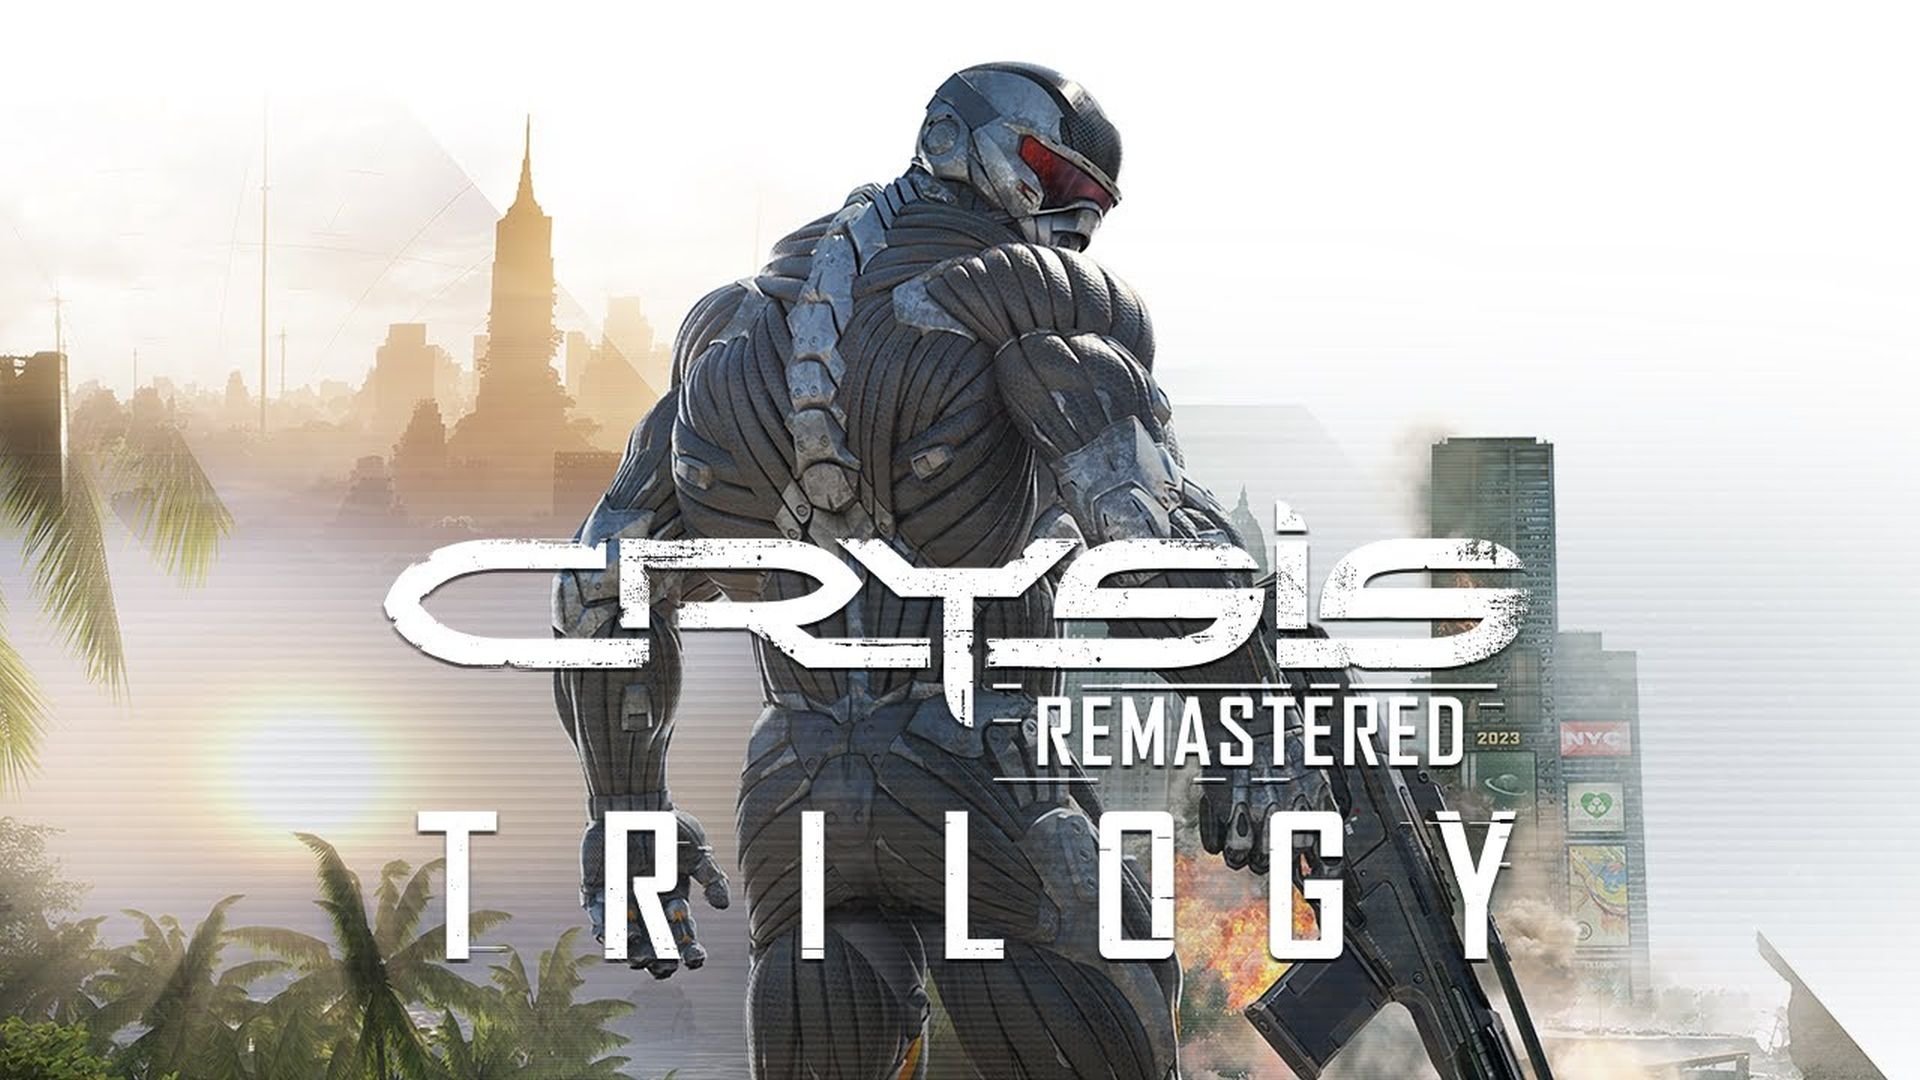 Crysis Remastered Trilogy release date announced